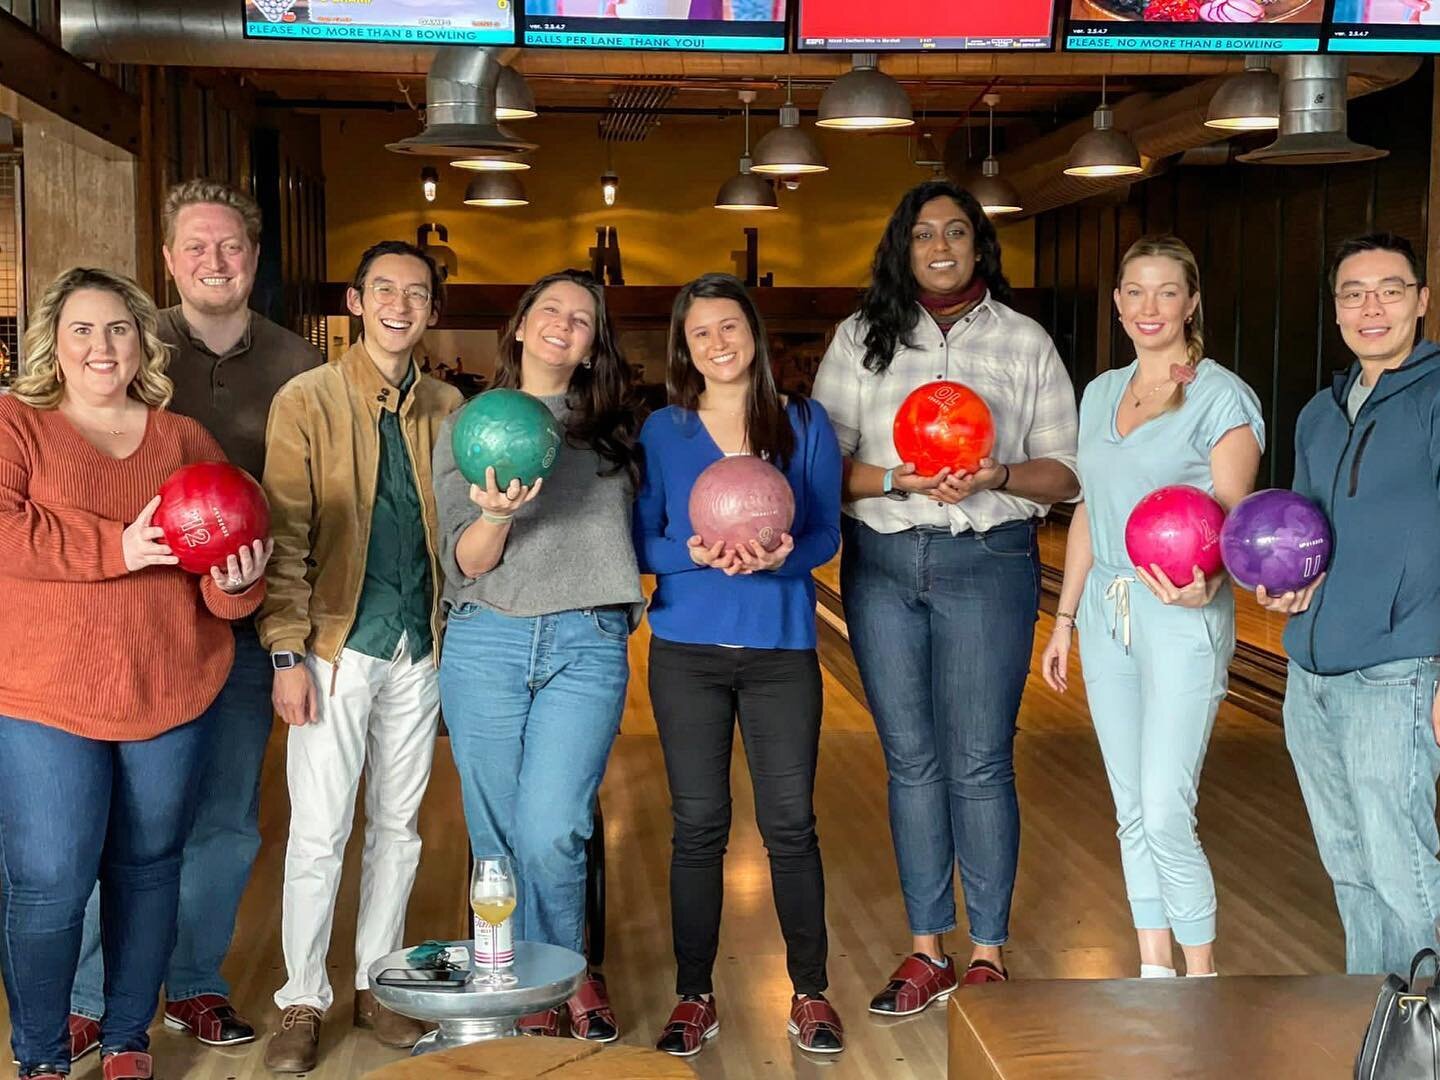 The young agile PGY2&rsquo;s take it to the bowling alley for a night in the gutter (JK, strikes all around!) 🤍🦃

#strike #turkey #gutterball #wellnessday #emergencymedicine